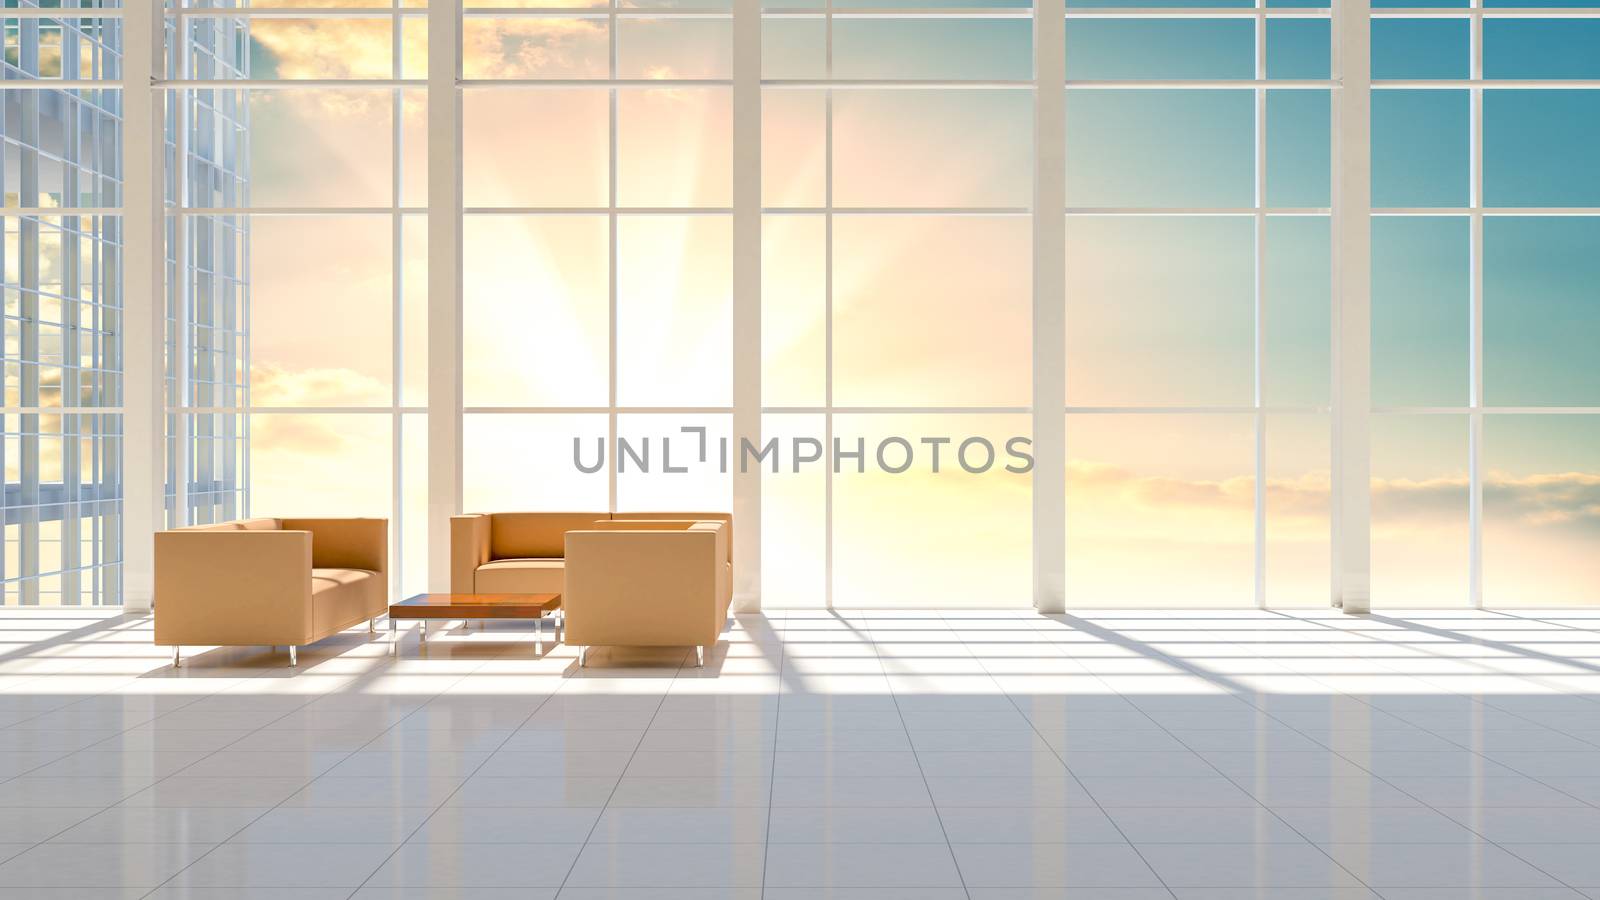 Minimal business interior of a skyscraper floor. Beautiful sunrise or sunset outside the windows. In the room there are sofas and a table. 3d illustration